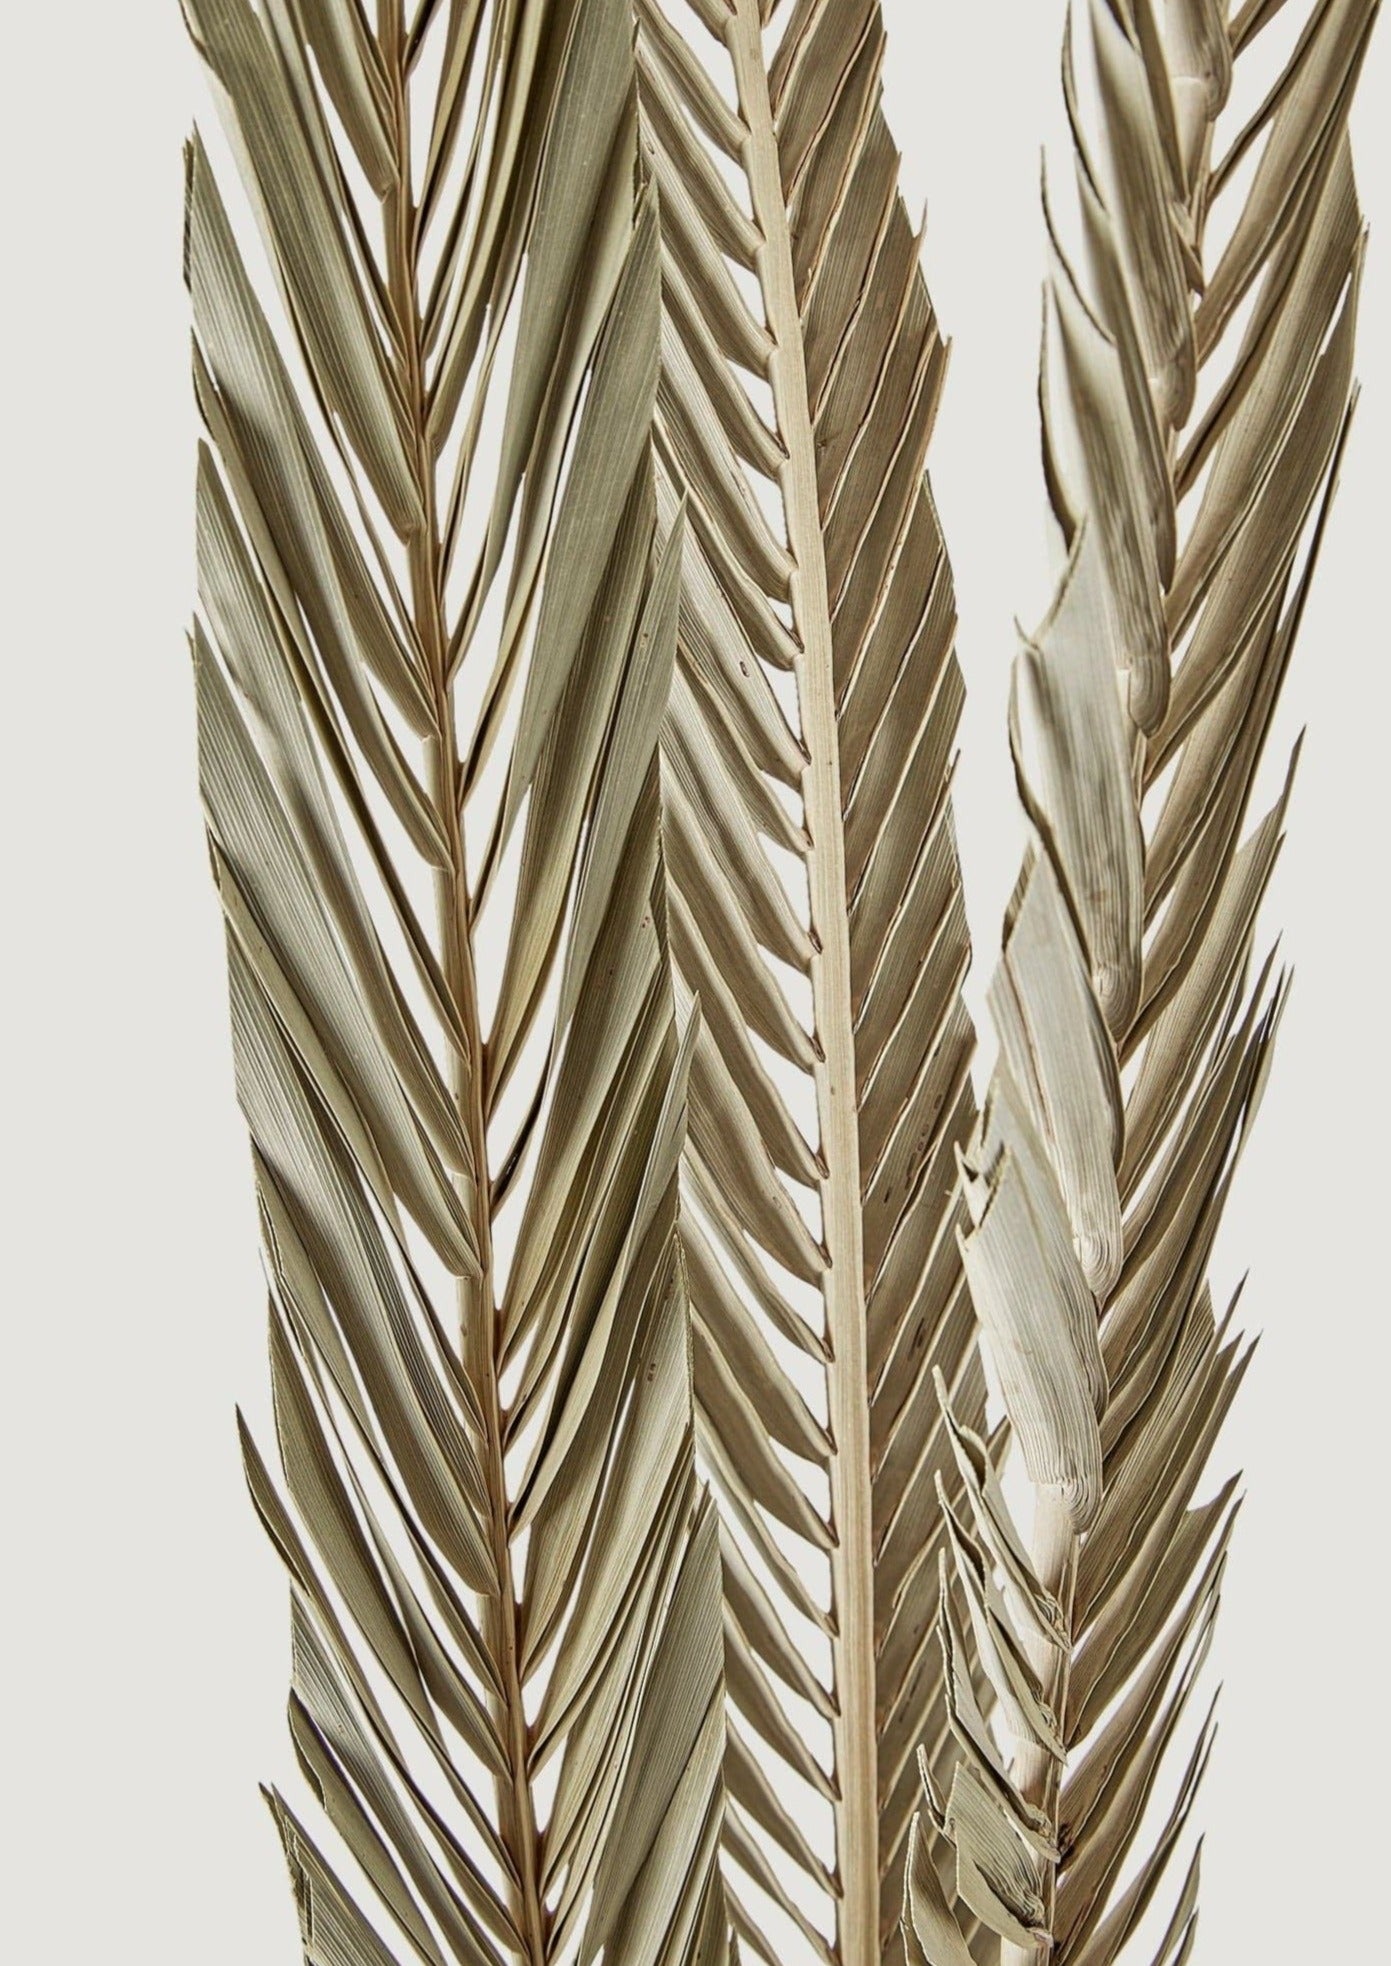 Dried Sword Palm Leaves in Closeup View